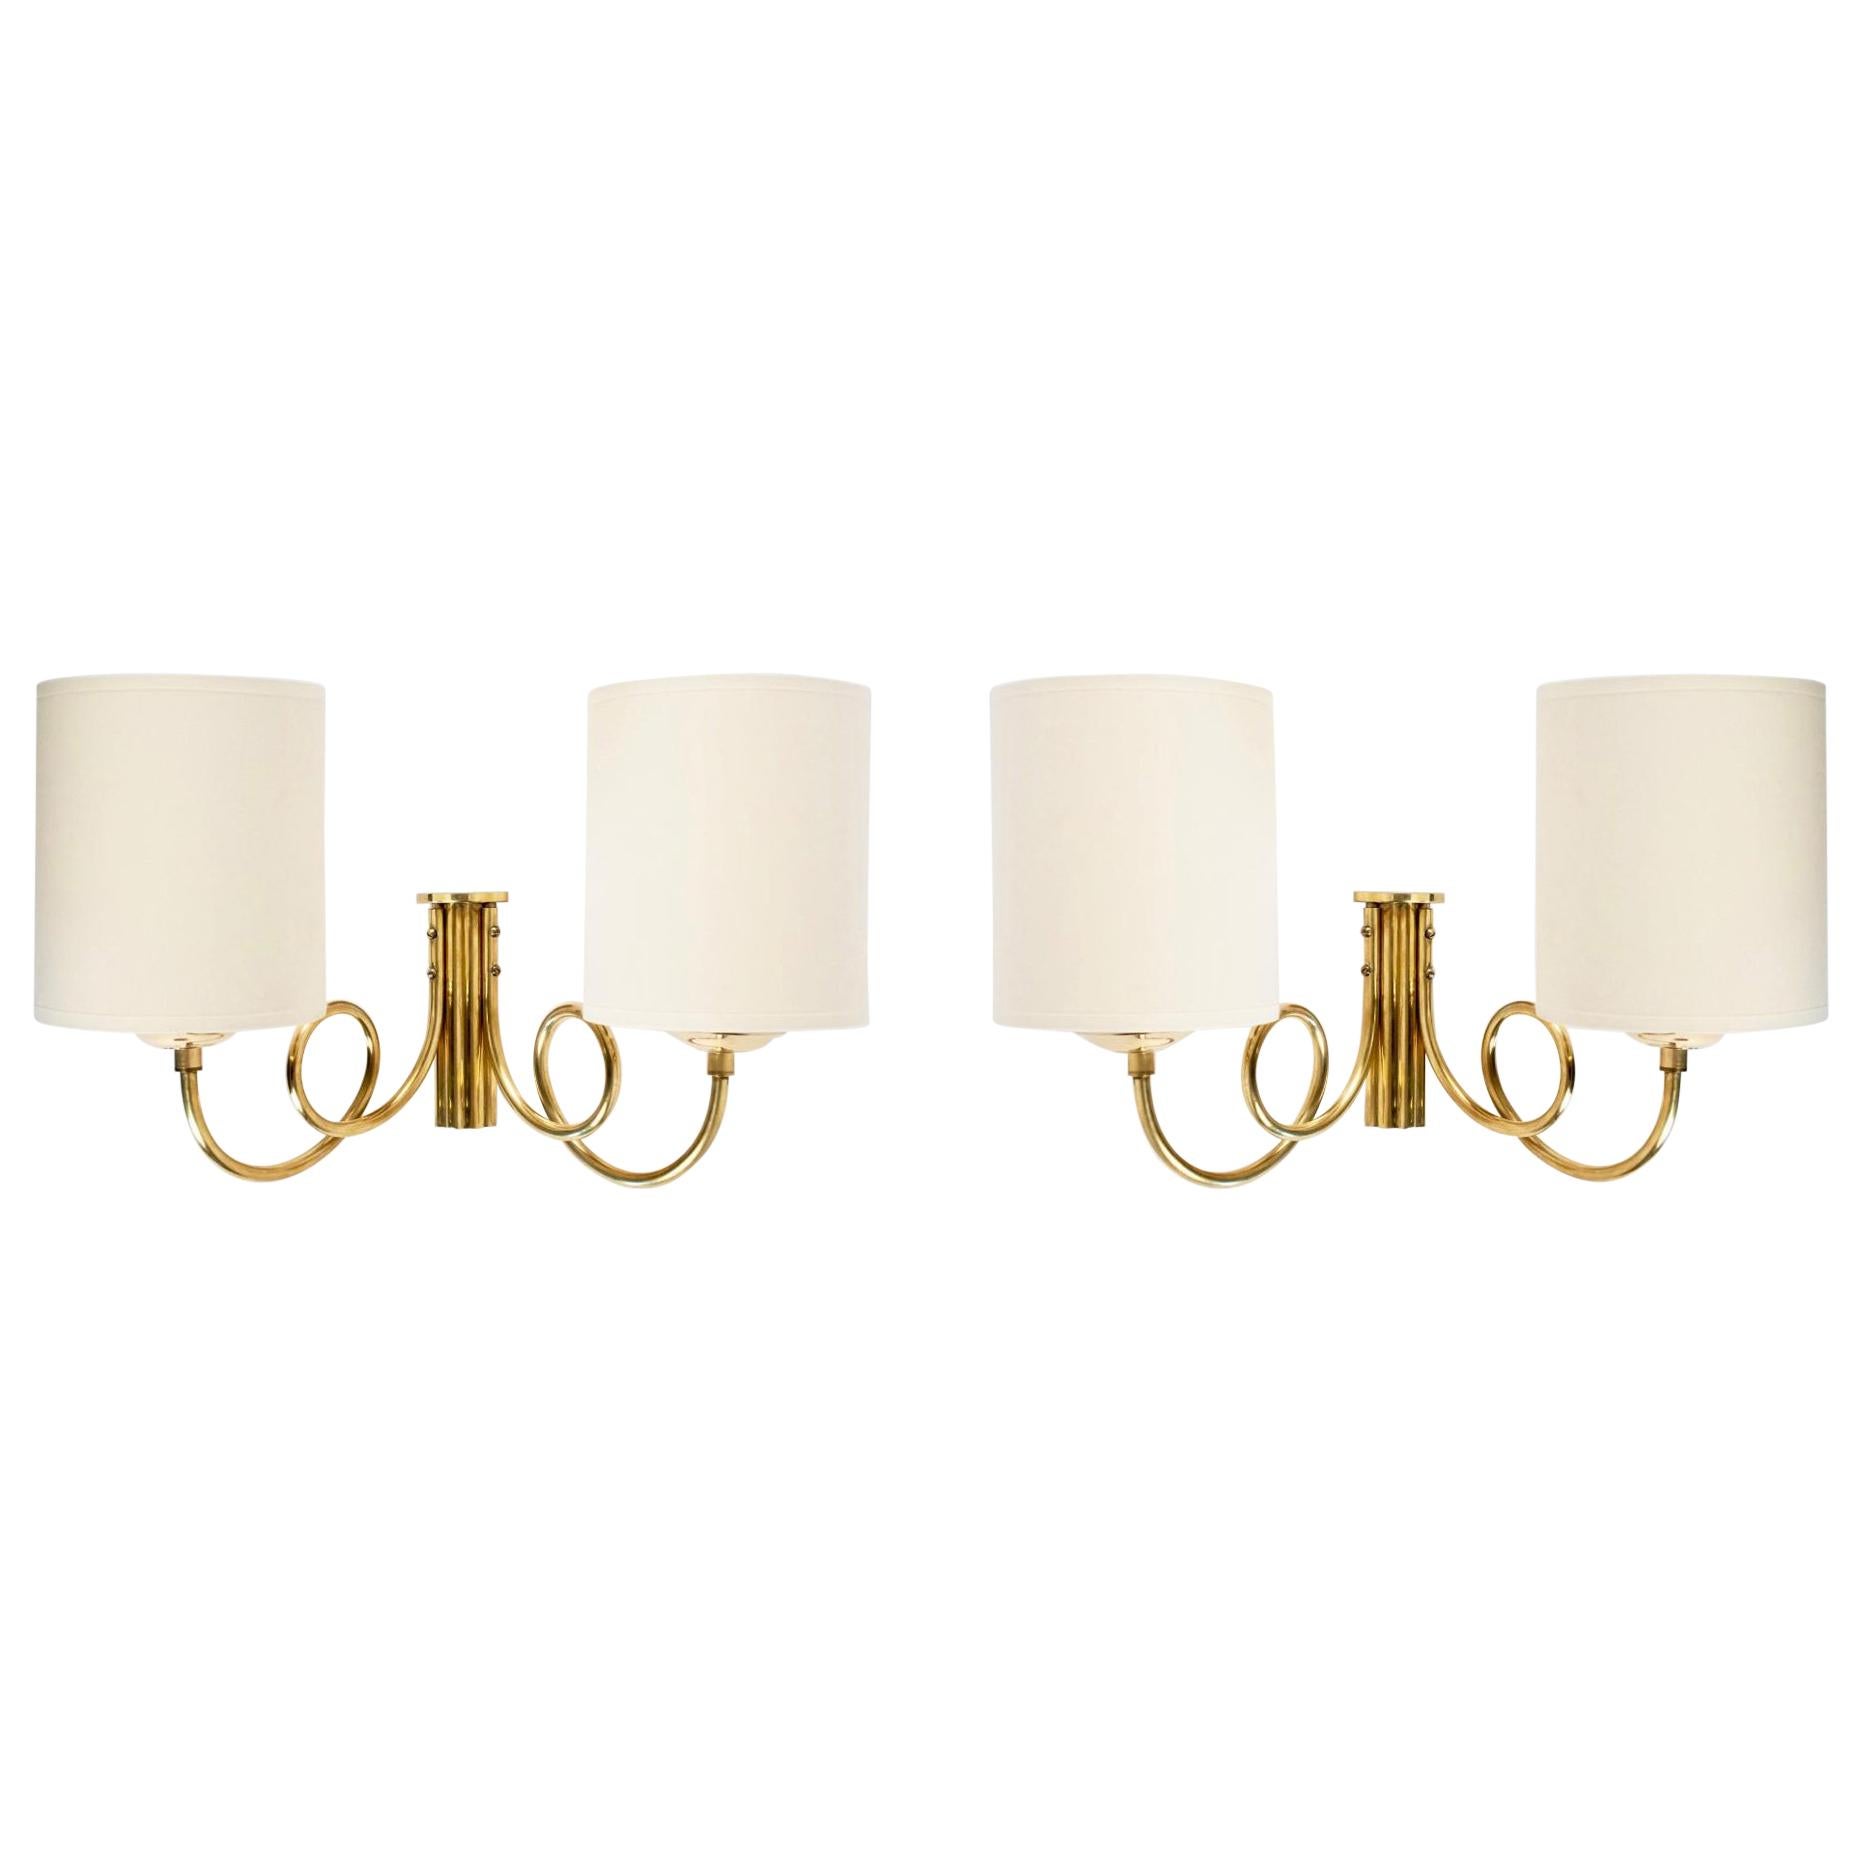 All made of gilded brass.
The two lighted arms are bend to form a pair of buckles. 
The back plate is a fluted half cylinder.
Cylindrical off-white cotton shades.

Two bulbs per sconces.